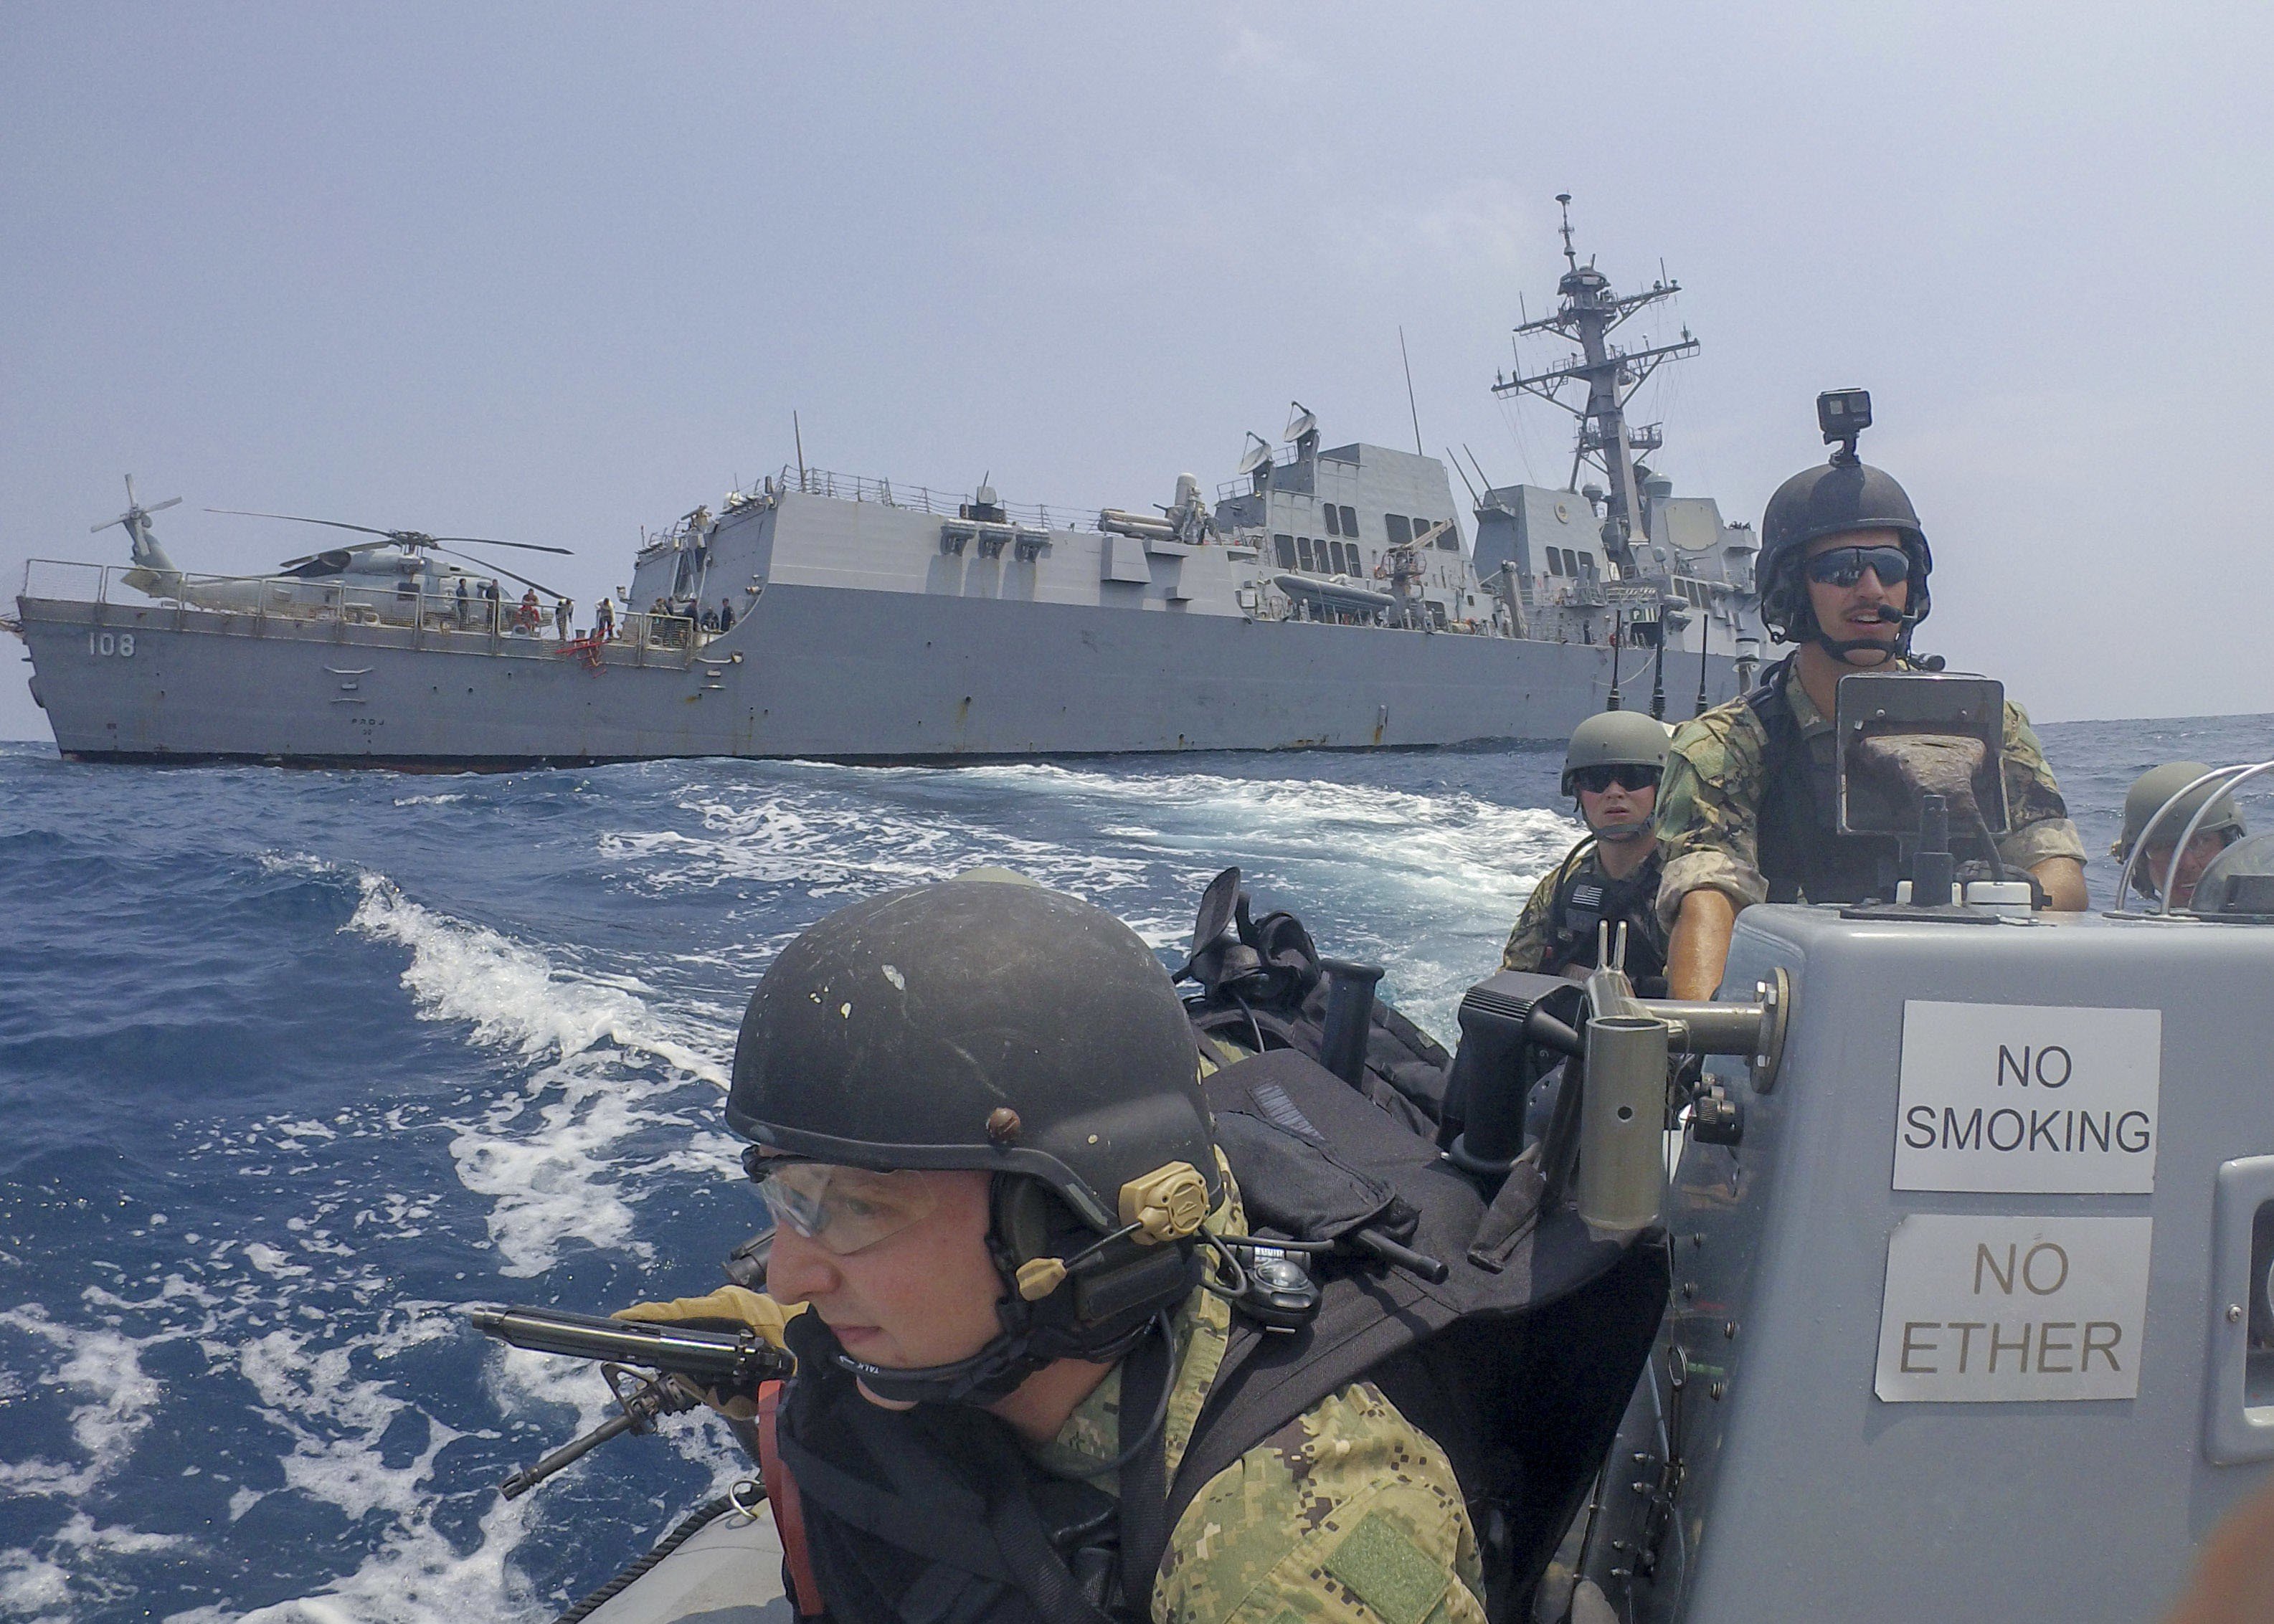 US Navy sailors ride in a rigid-hull inflatable from the USS Wayne E. Meyer during a drill as part of an Asean-US maritime exercise on September 5 in the Gulf of Thailand. The Pentagon has been sharply stepping up its efforts to counter China's growing military power. Photo: Handout via AFP